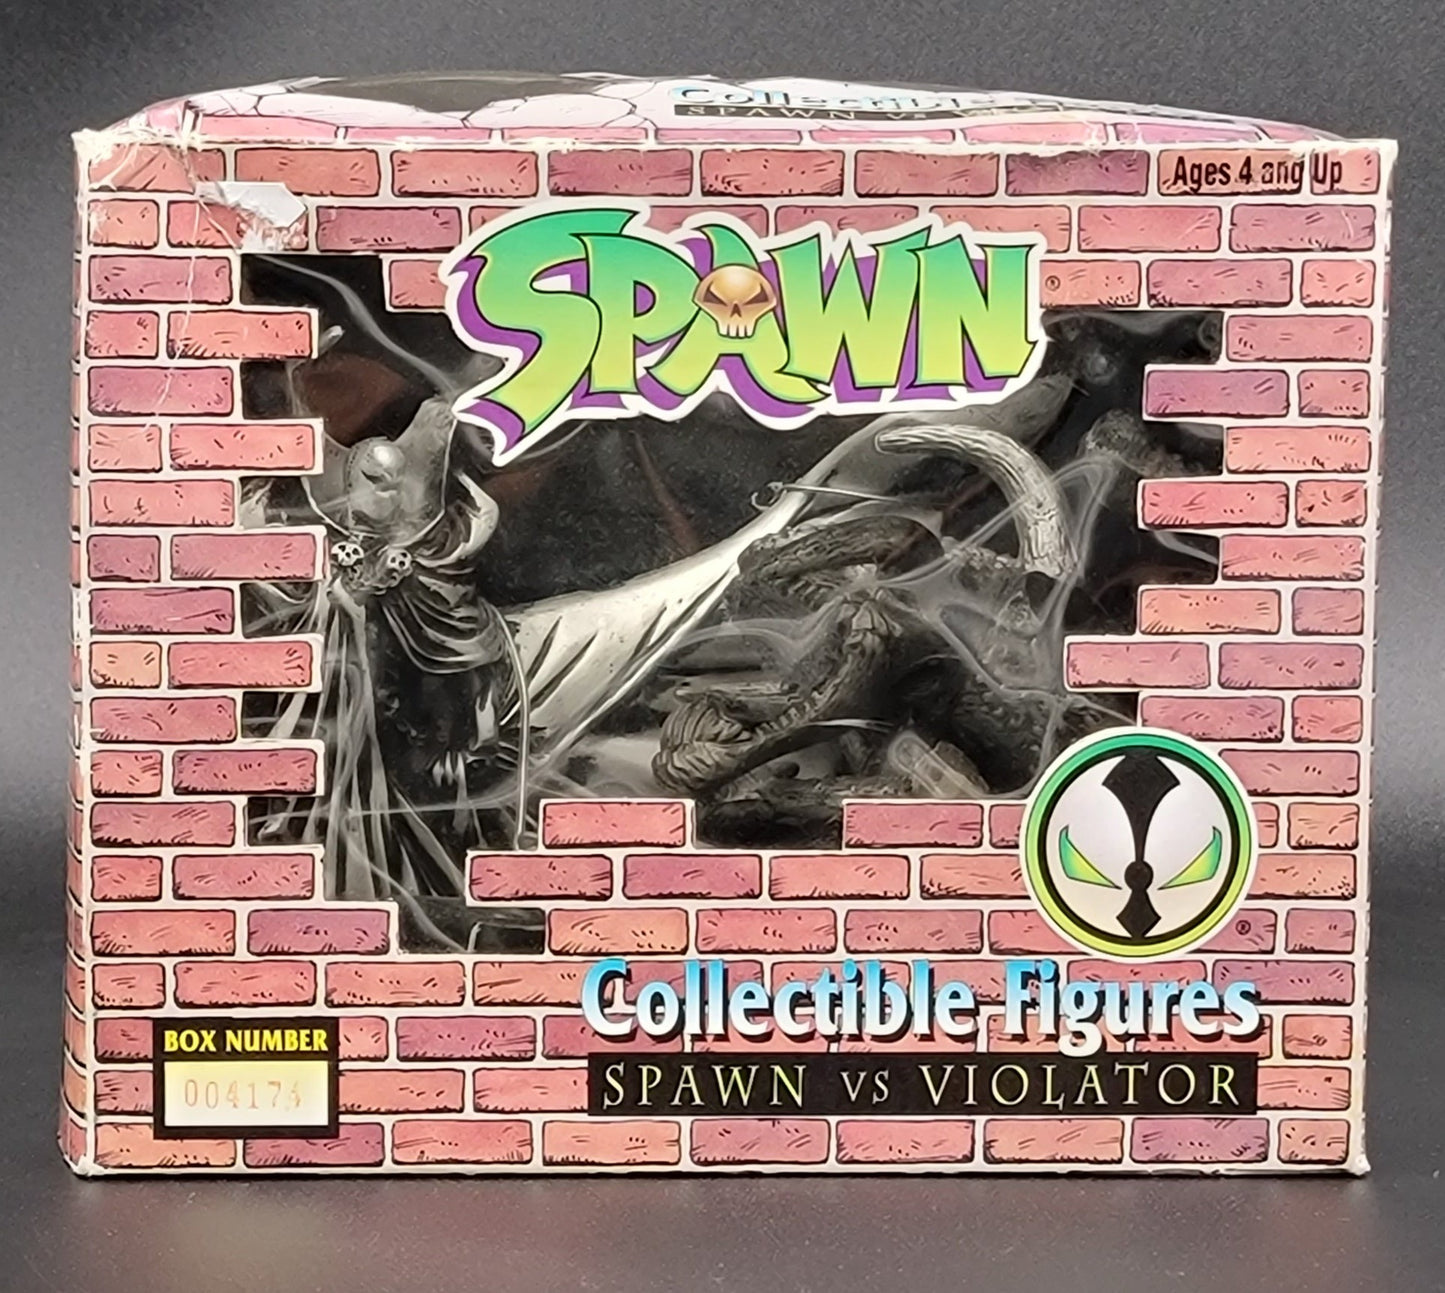 Spawn vs Violator Collectible Figure (damaged/repairable) numbered 4174